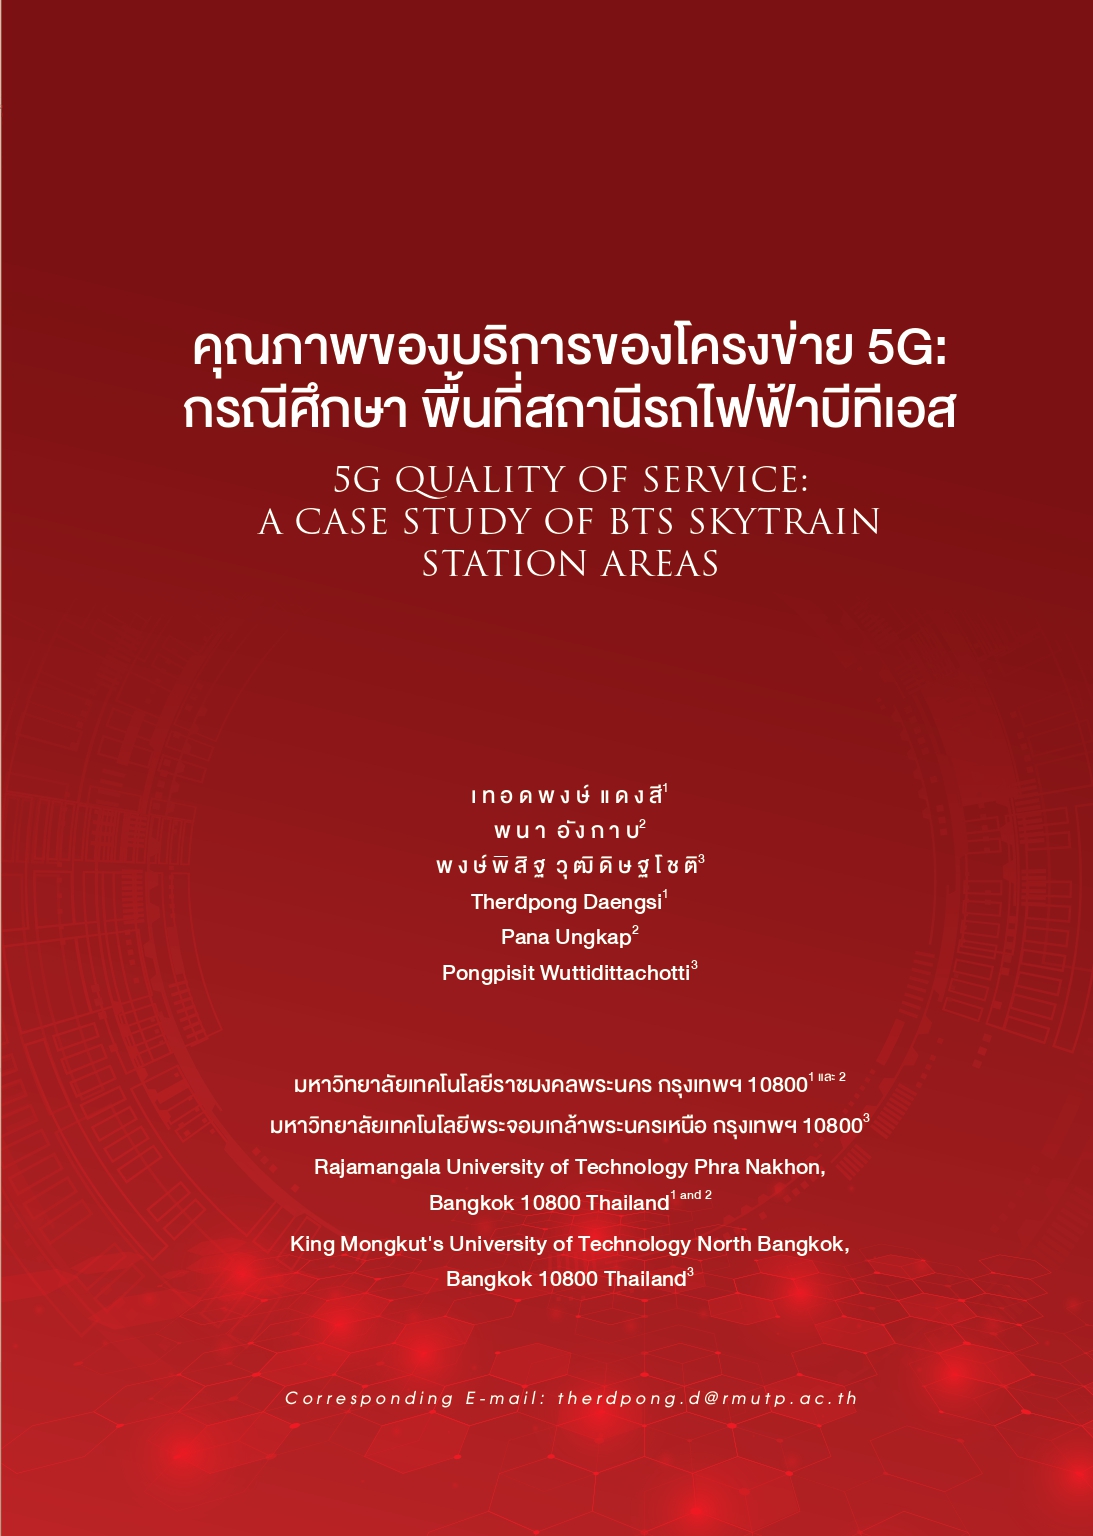 5G QUALITY OF SERVICE: A CASE STUDY OF BTS SKYTRAIN STATION AREAS